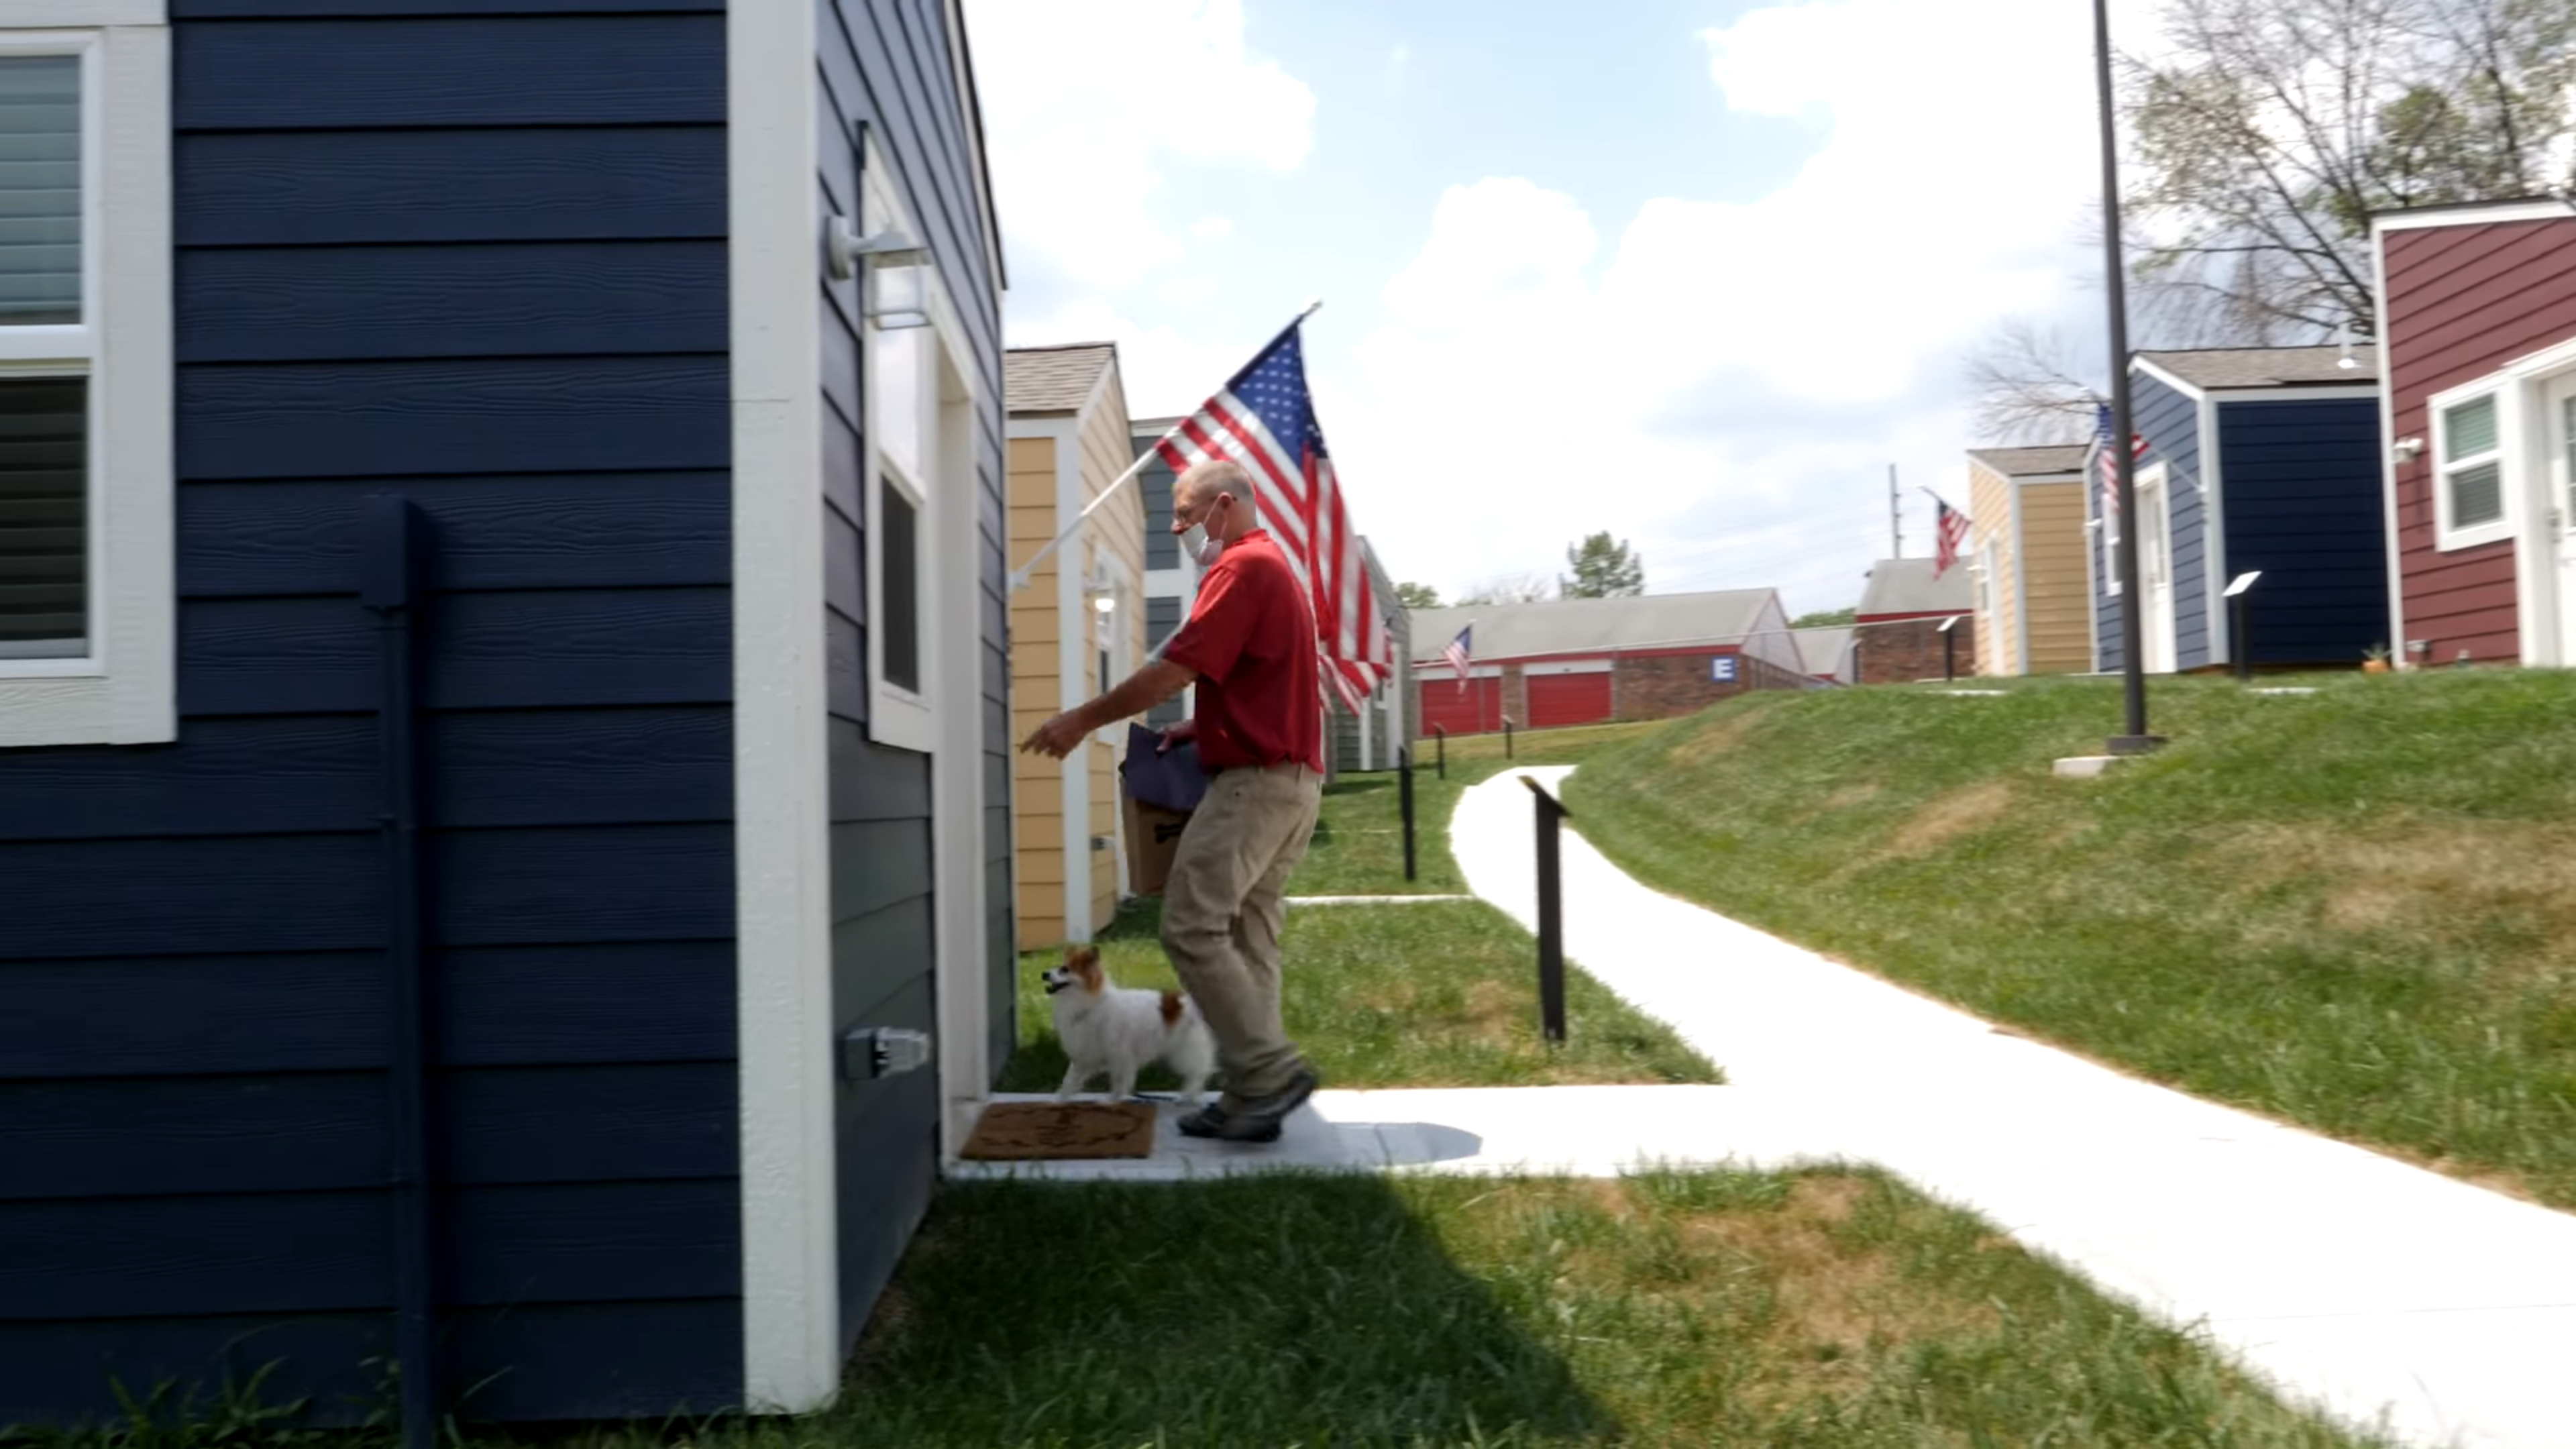 Tiny homes bring huge comfort to veterans in need